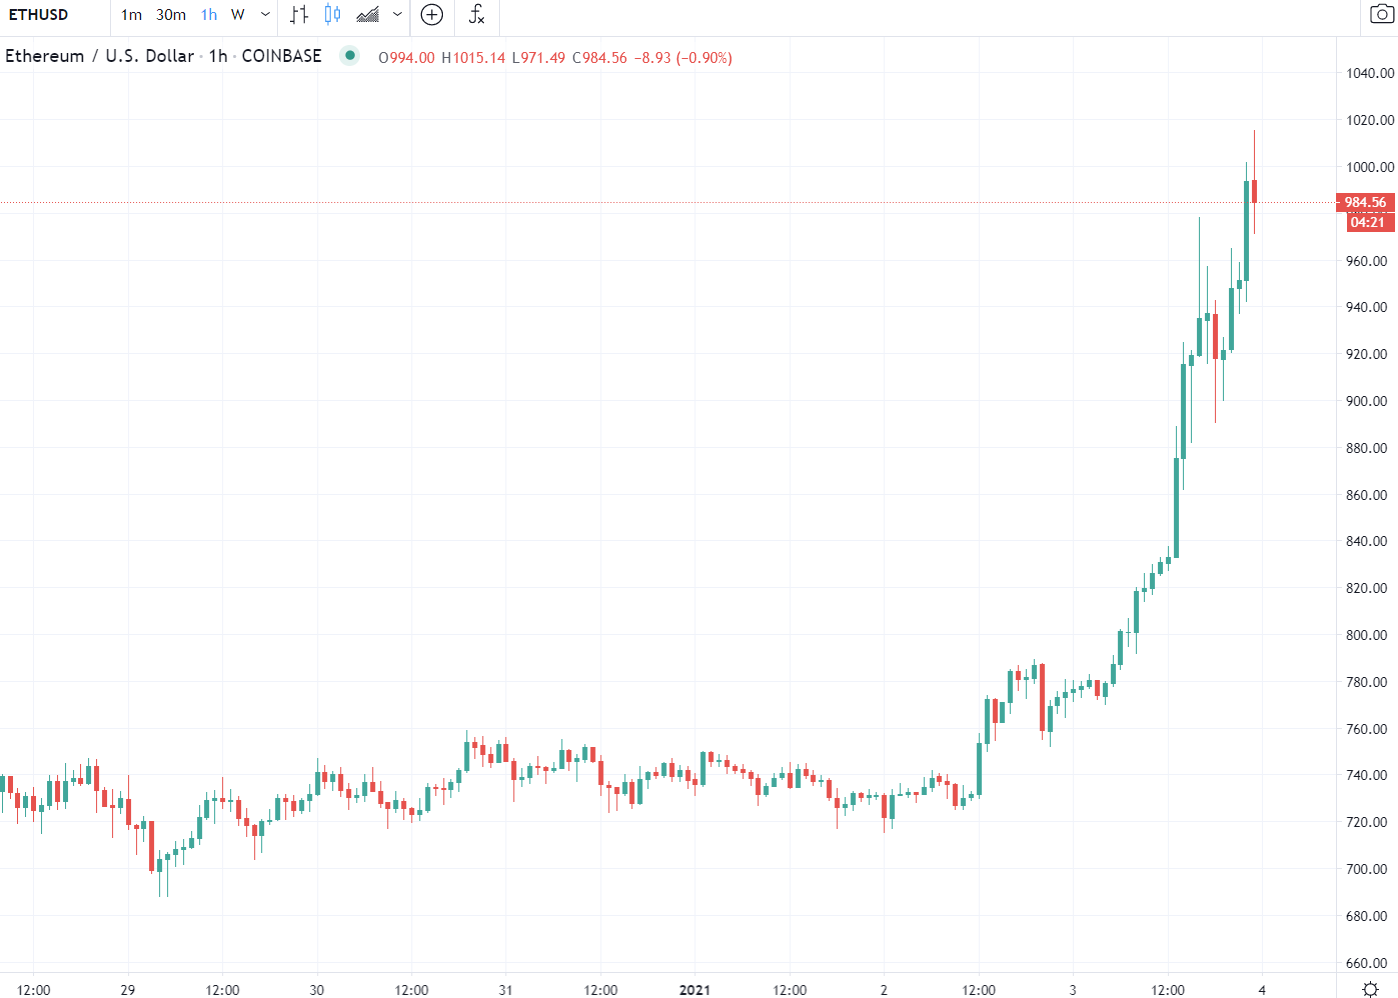 Ether surging to highs over 1K, a parabolic type move in past hours: 